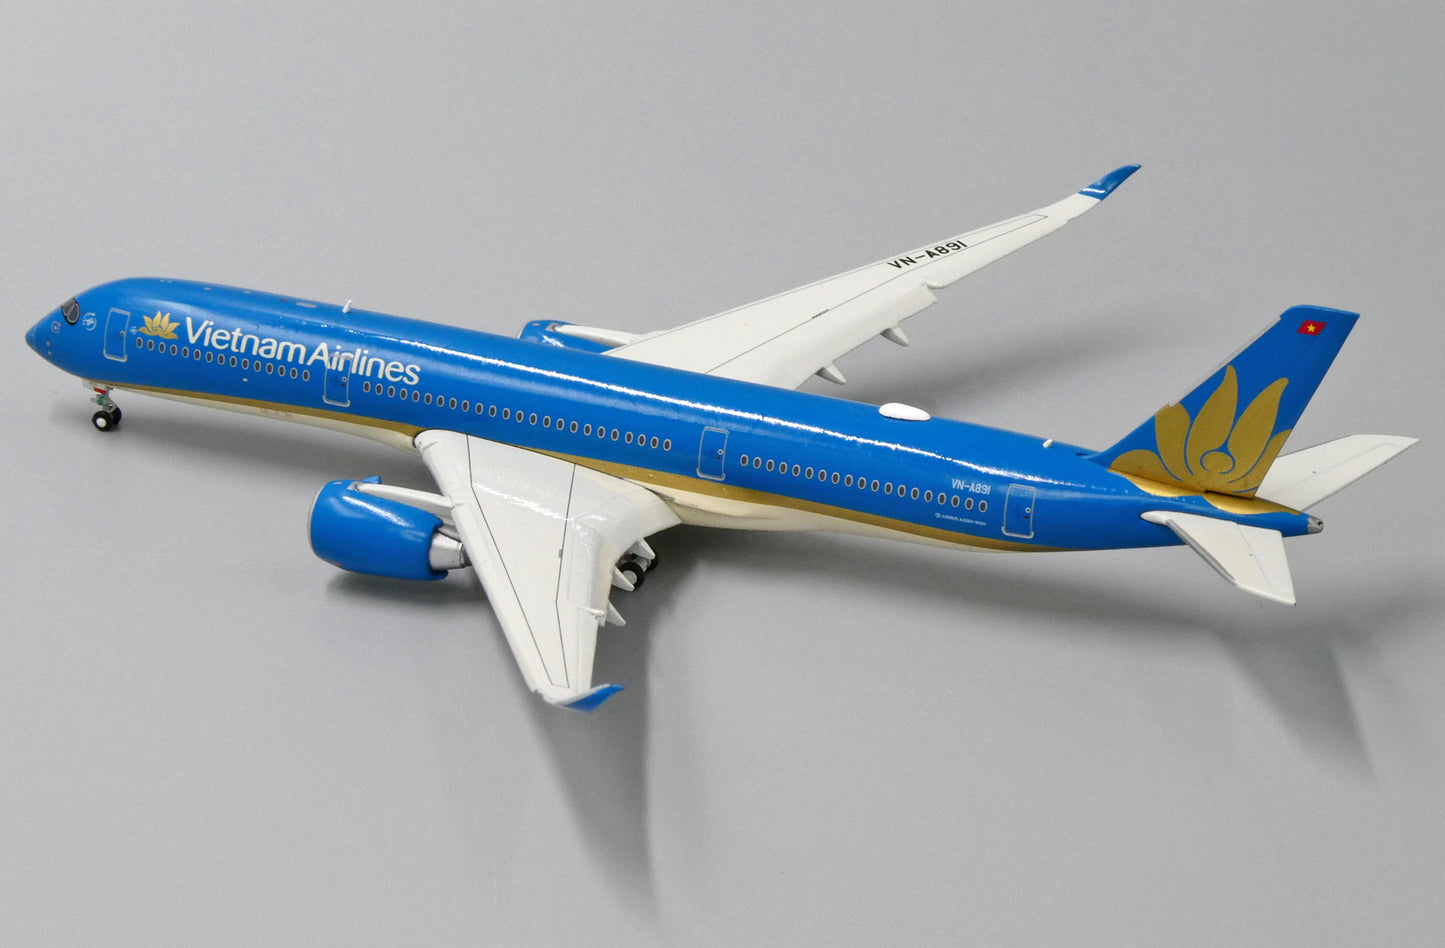 1:400 JC Wings Vietnam Airlines Airbus A350-900 "Flaps Down" VN-A891 LH4053A